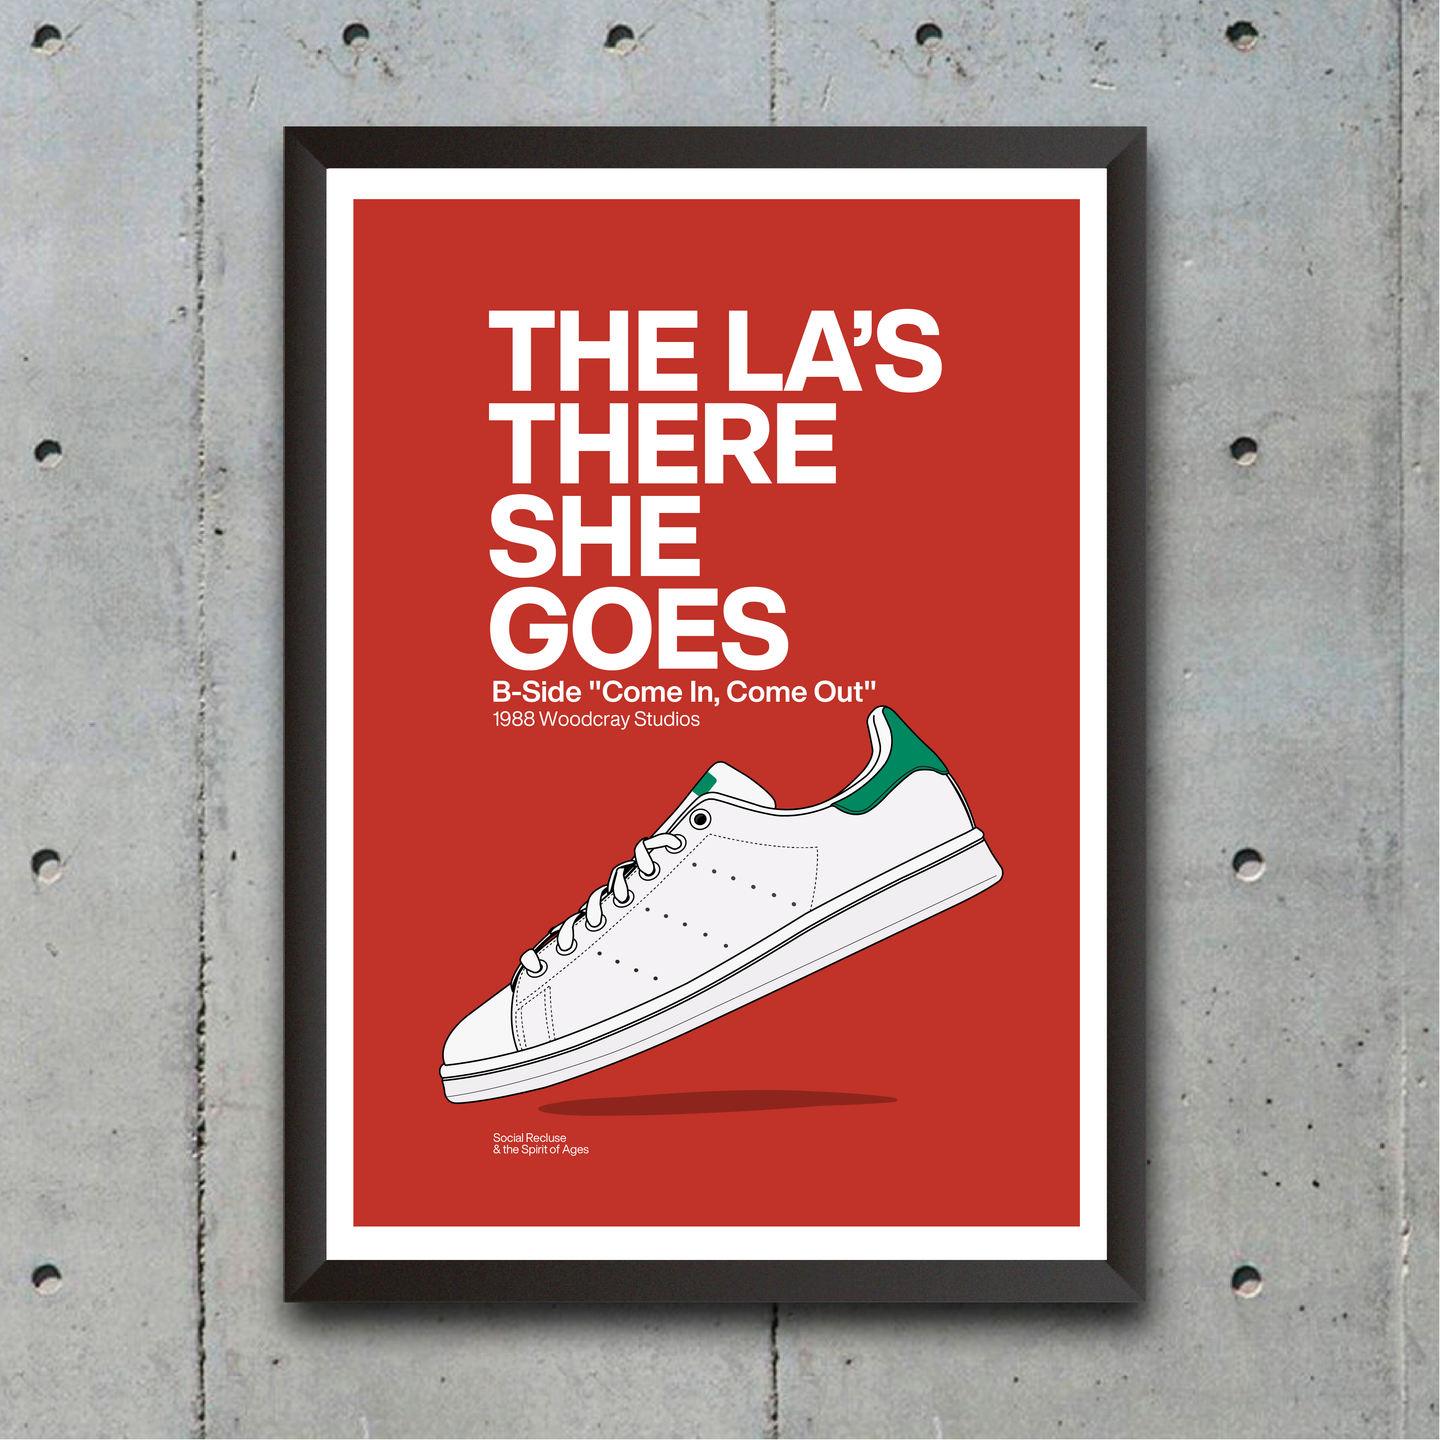 THERE SHE GOES - PRINT